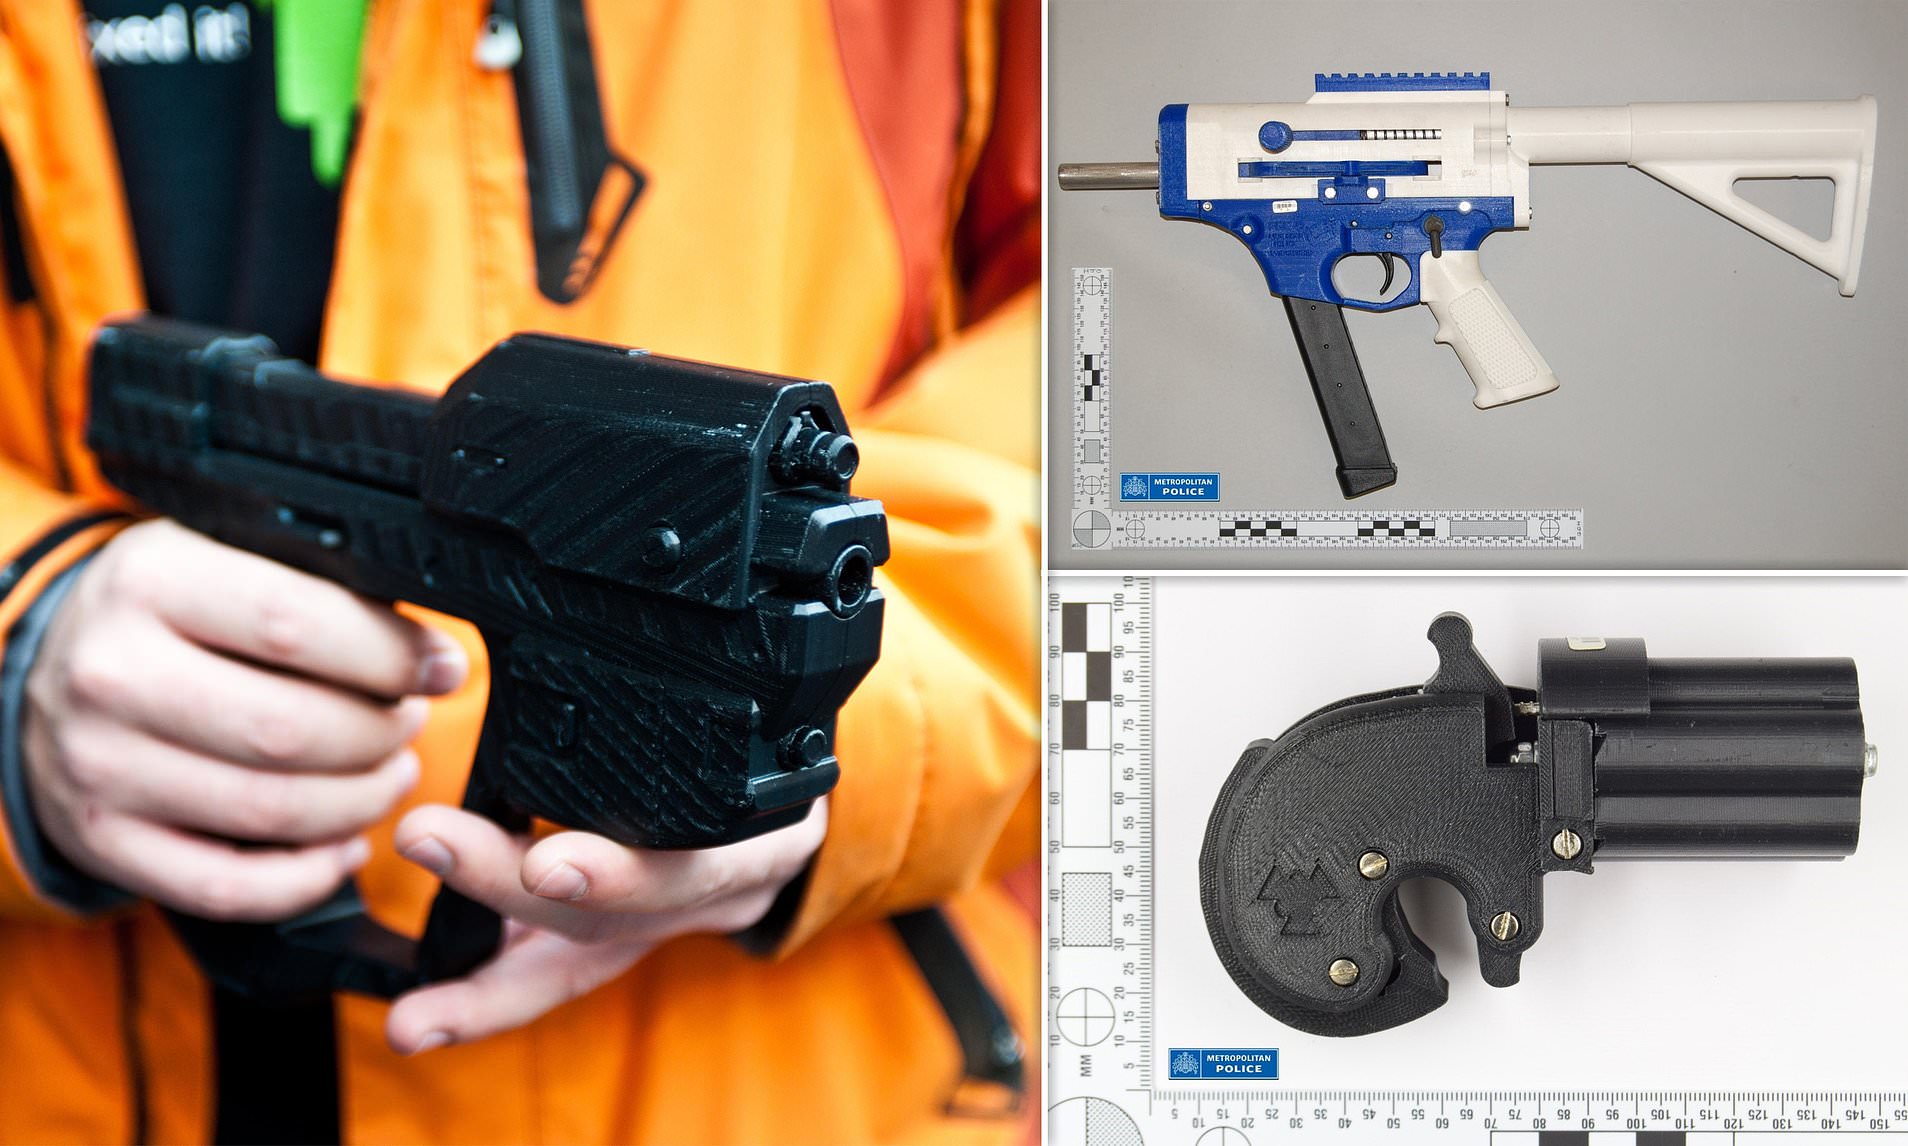 from-toy-models-to-lethal-weapons-the-controversy-of-3d-printed-guns-2 From Toy Models to Lethal Weapons: The Controversy of 3D Printed Guns